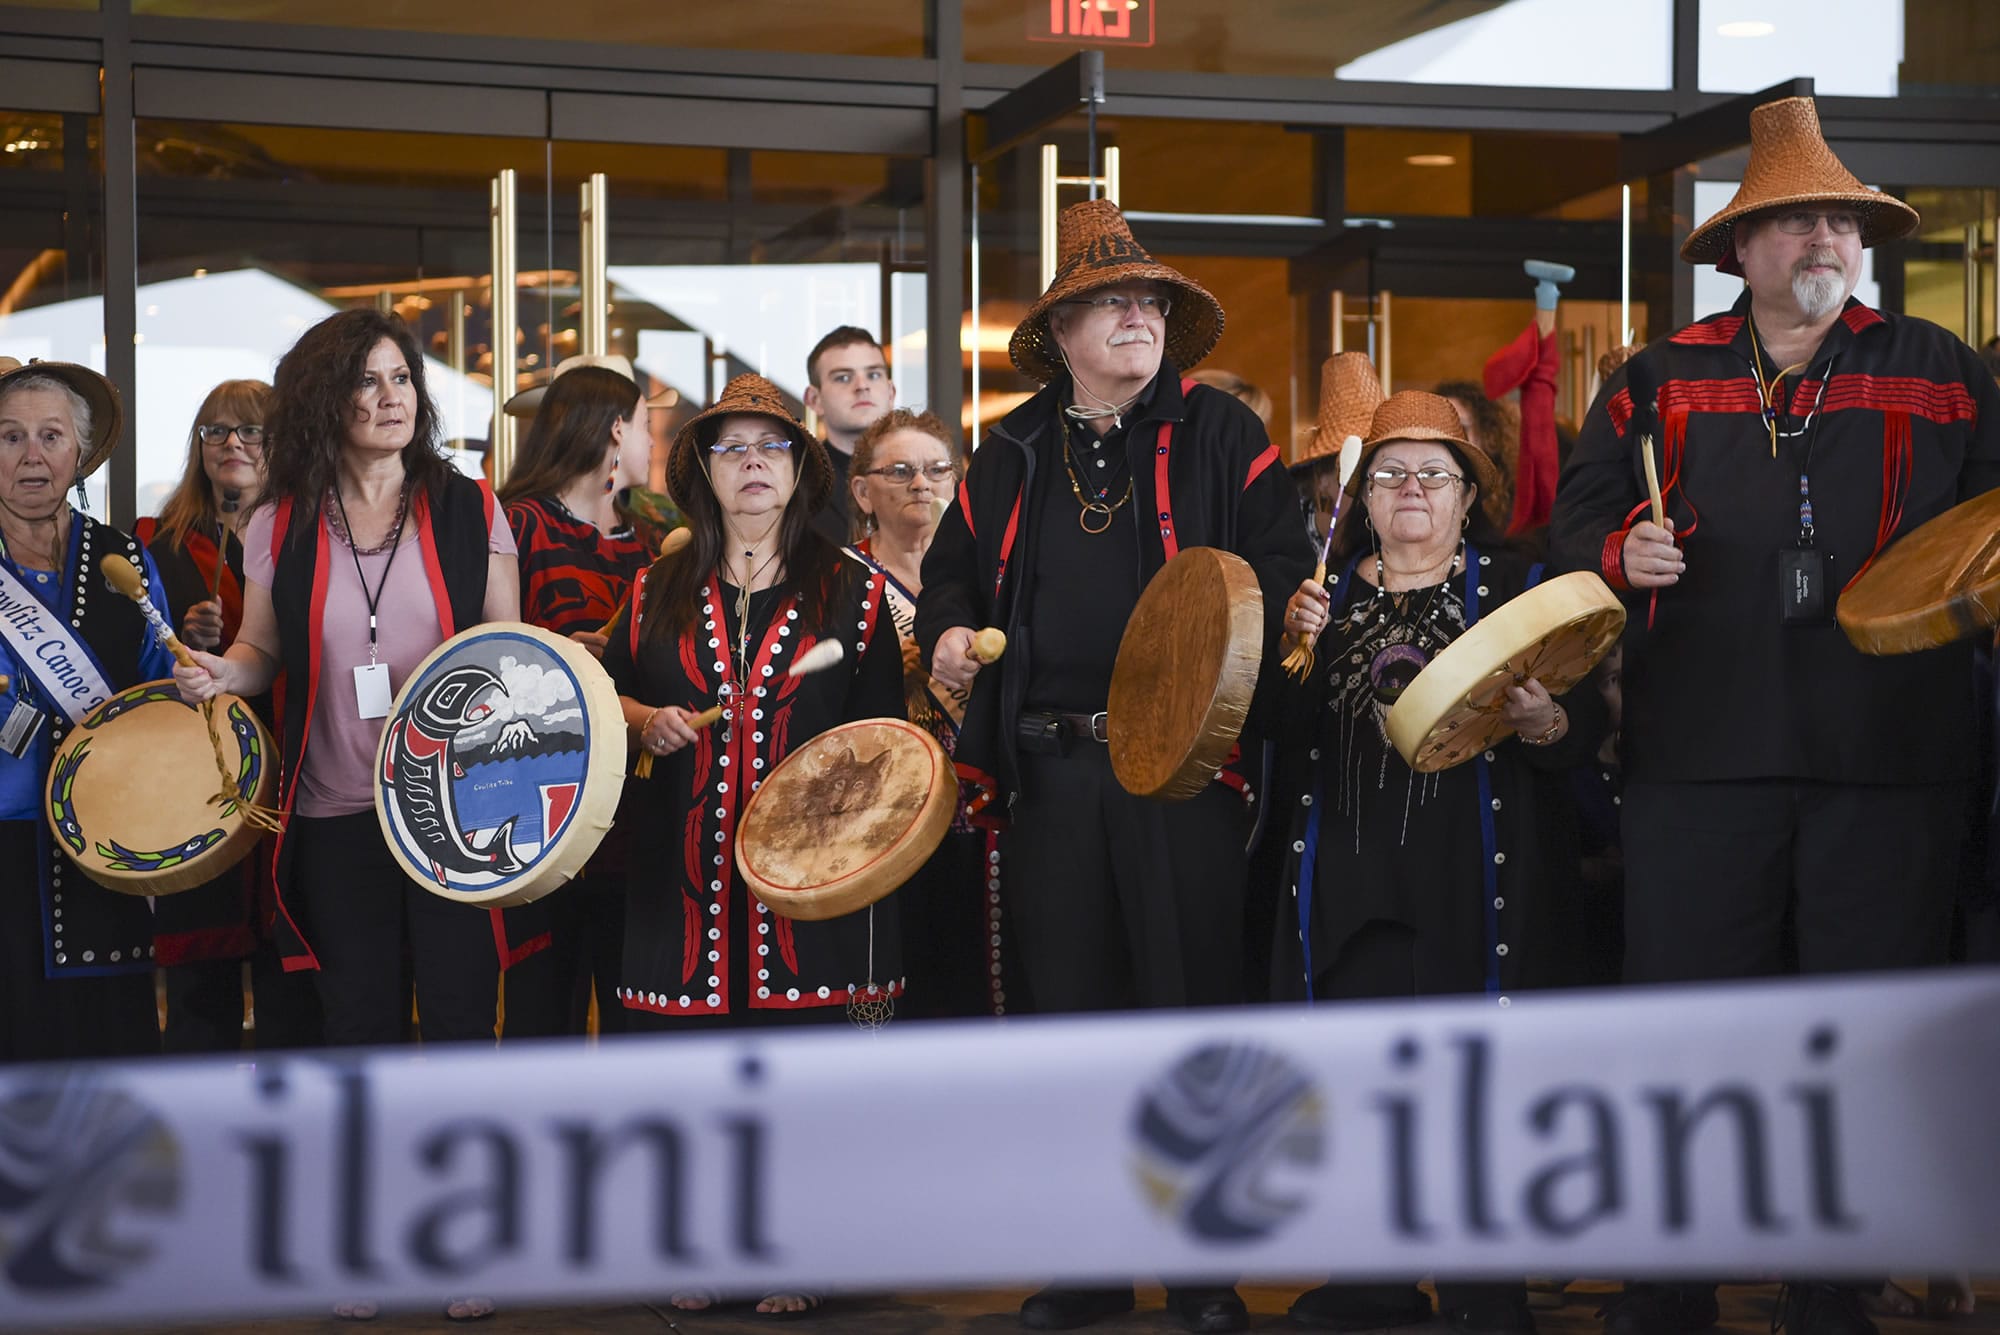 Members of the Cowlitz Drum Group perform during a ceremony for the grand opening of Ilani Casino Resort near La Center on April 24.